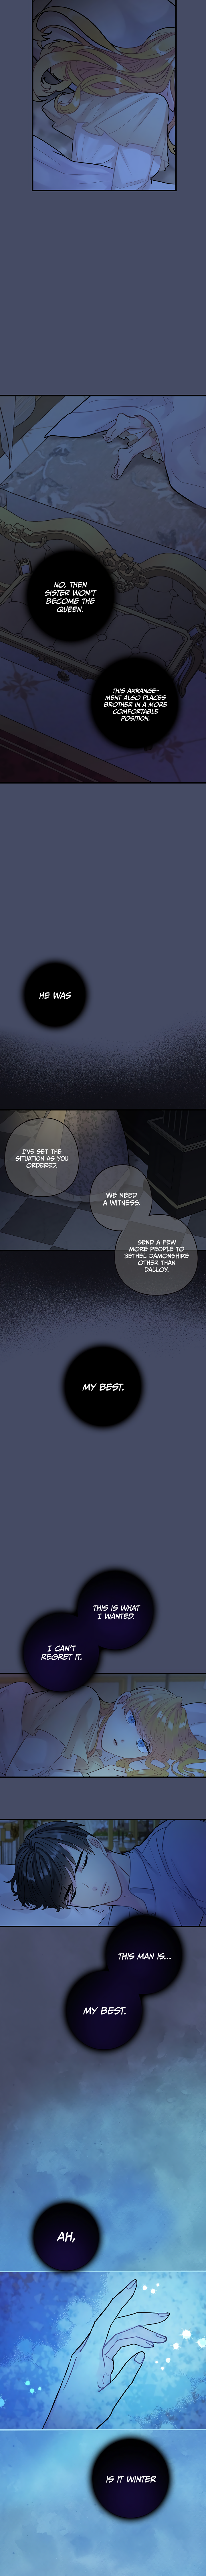 The Flower Dance and the Wind Song Chapter 23 - Page 5